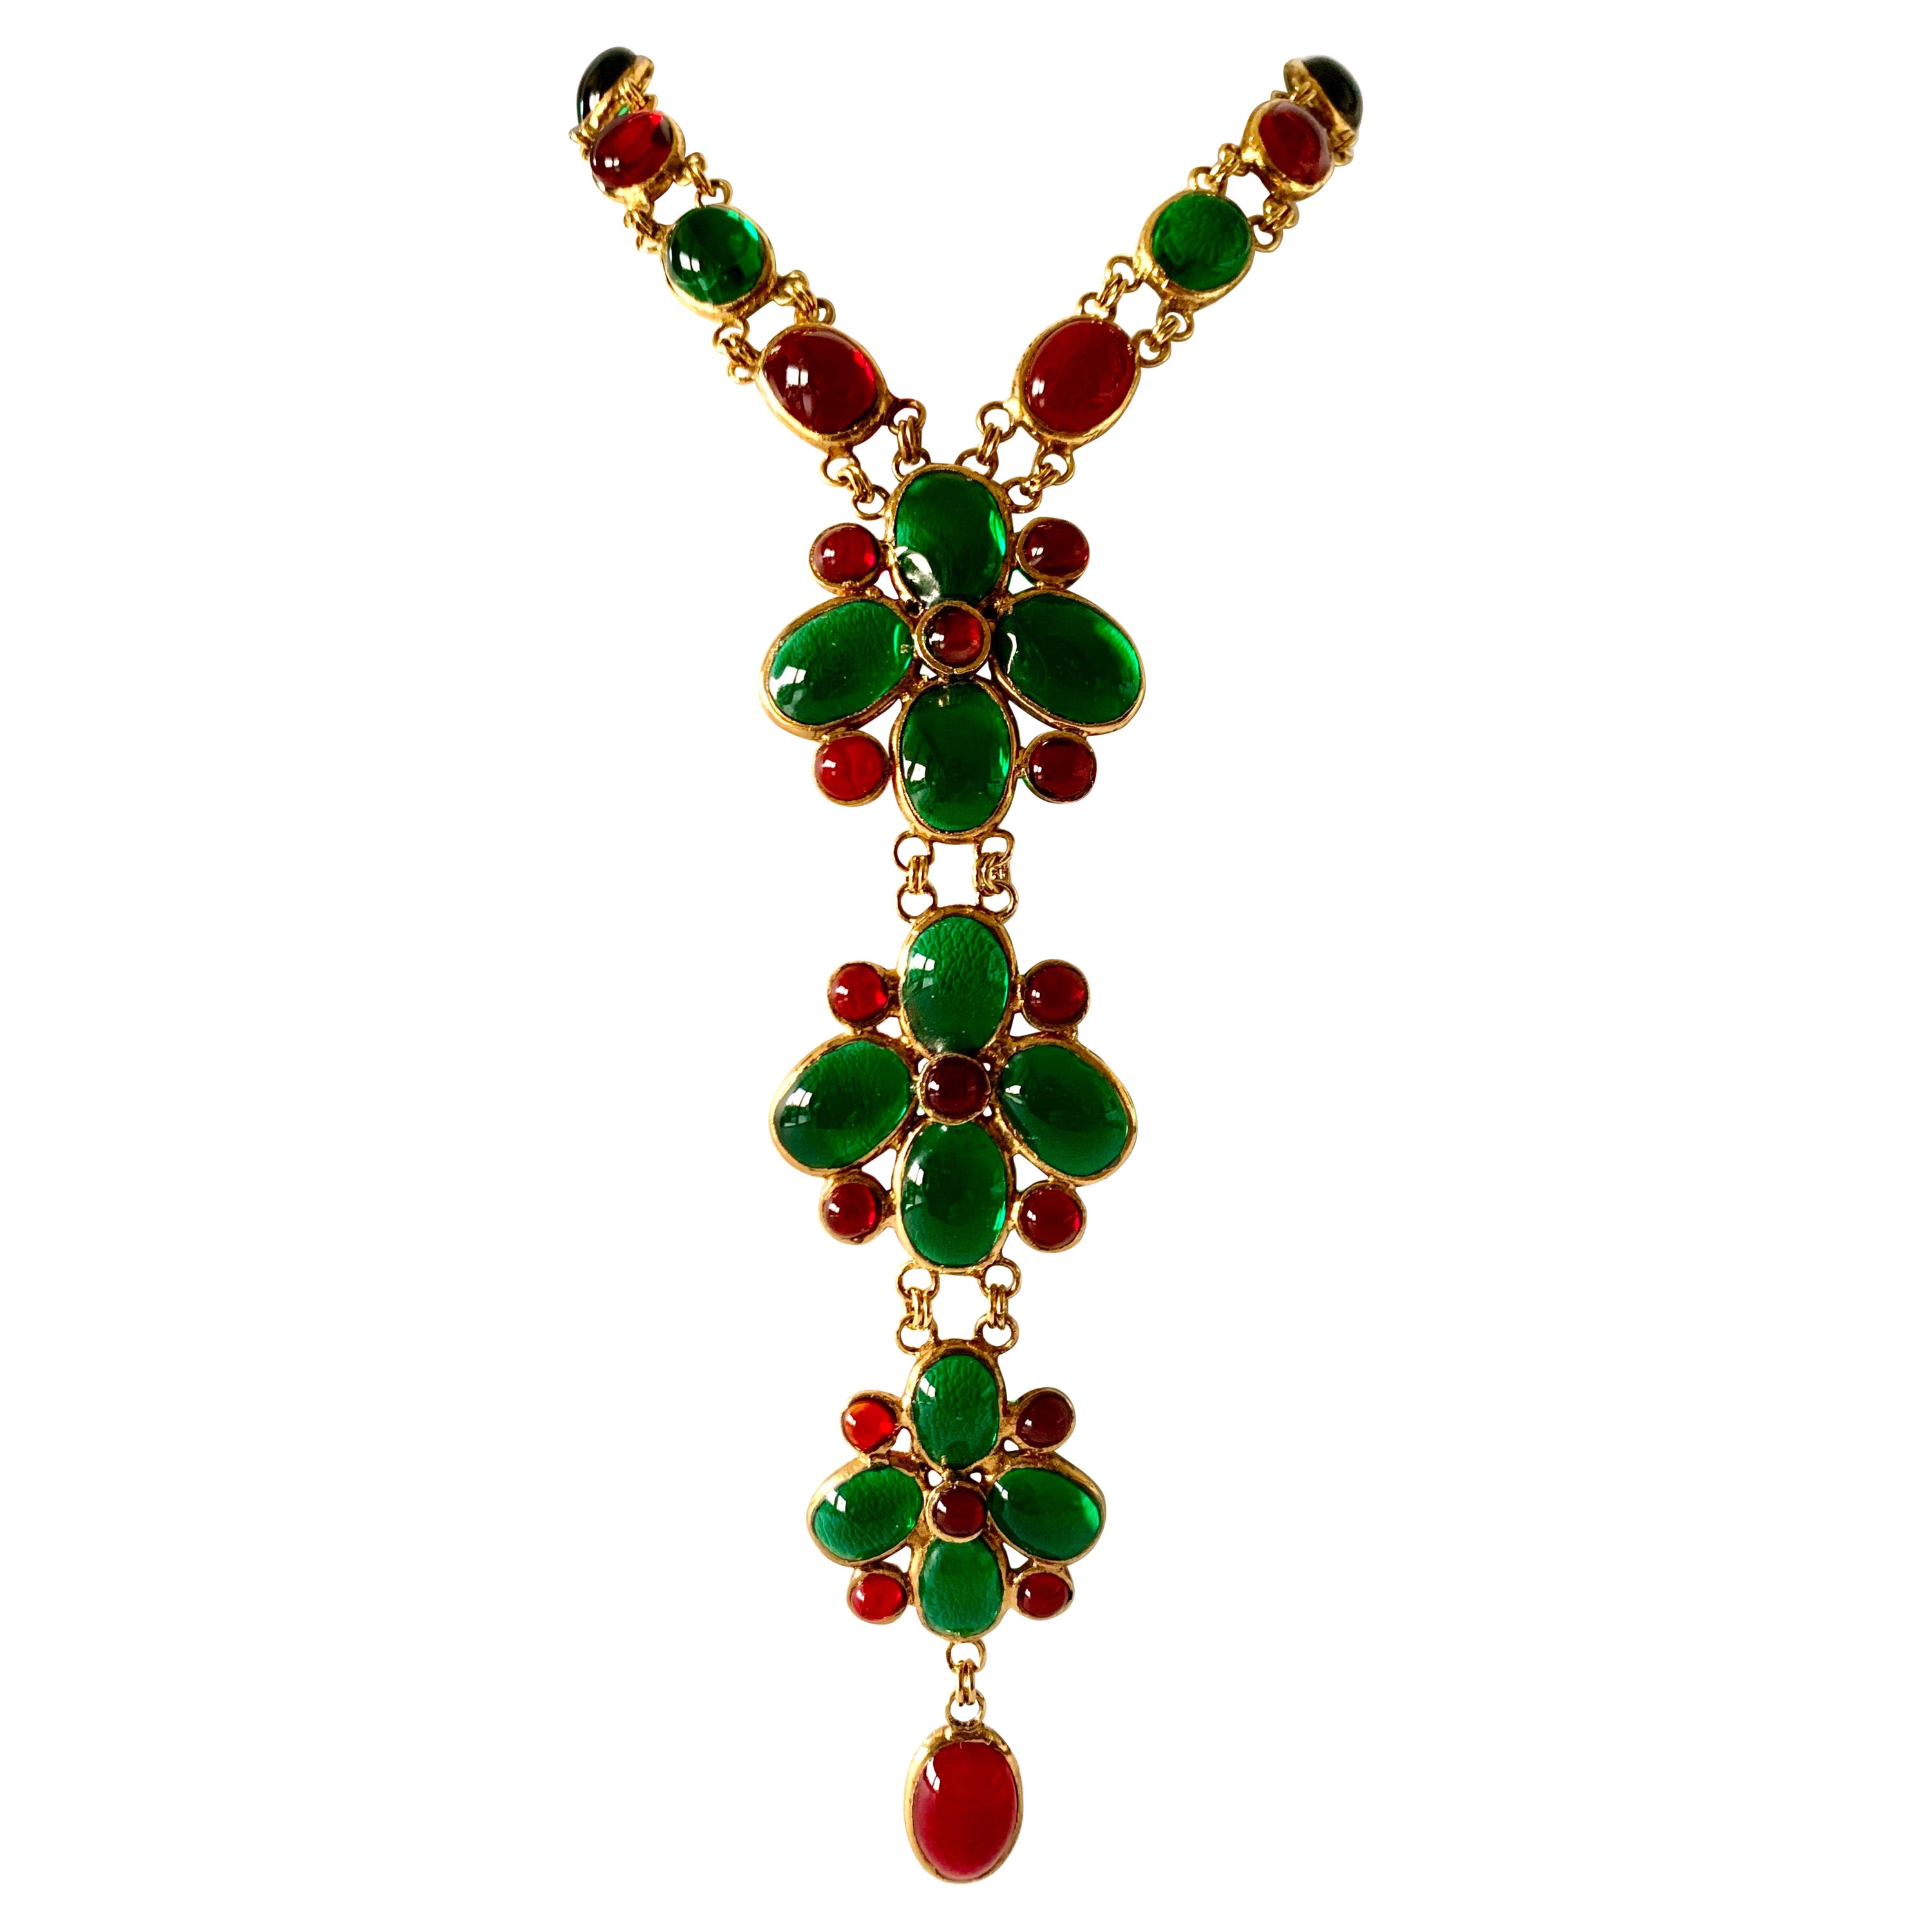 Vintage Coco Chanel Gilt, Green and Red Statement Necklace